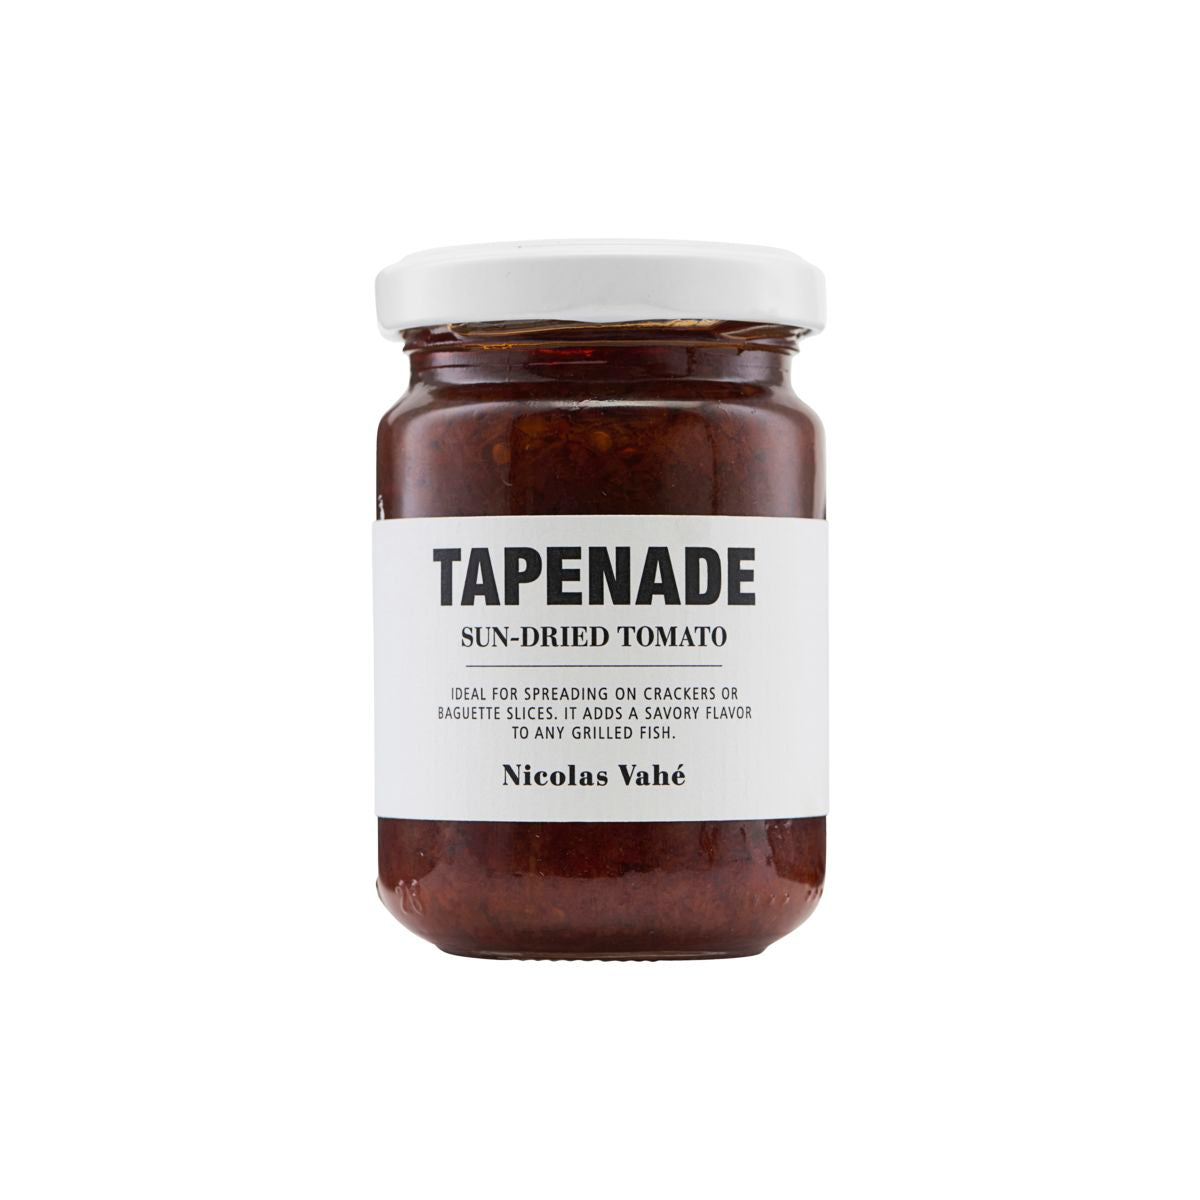 Tapenade - Sundried Tomatoes